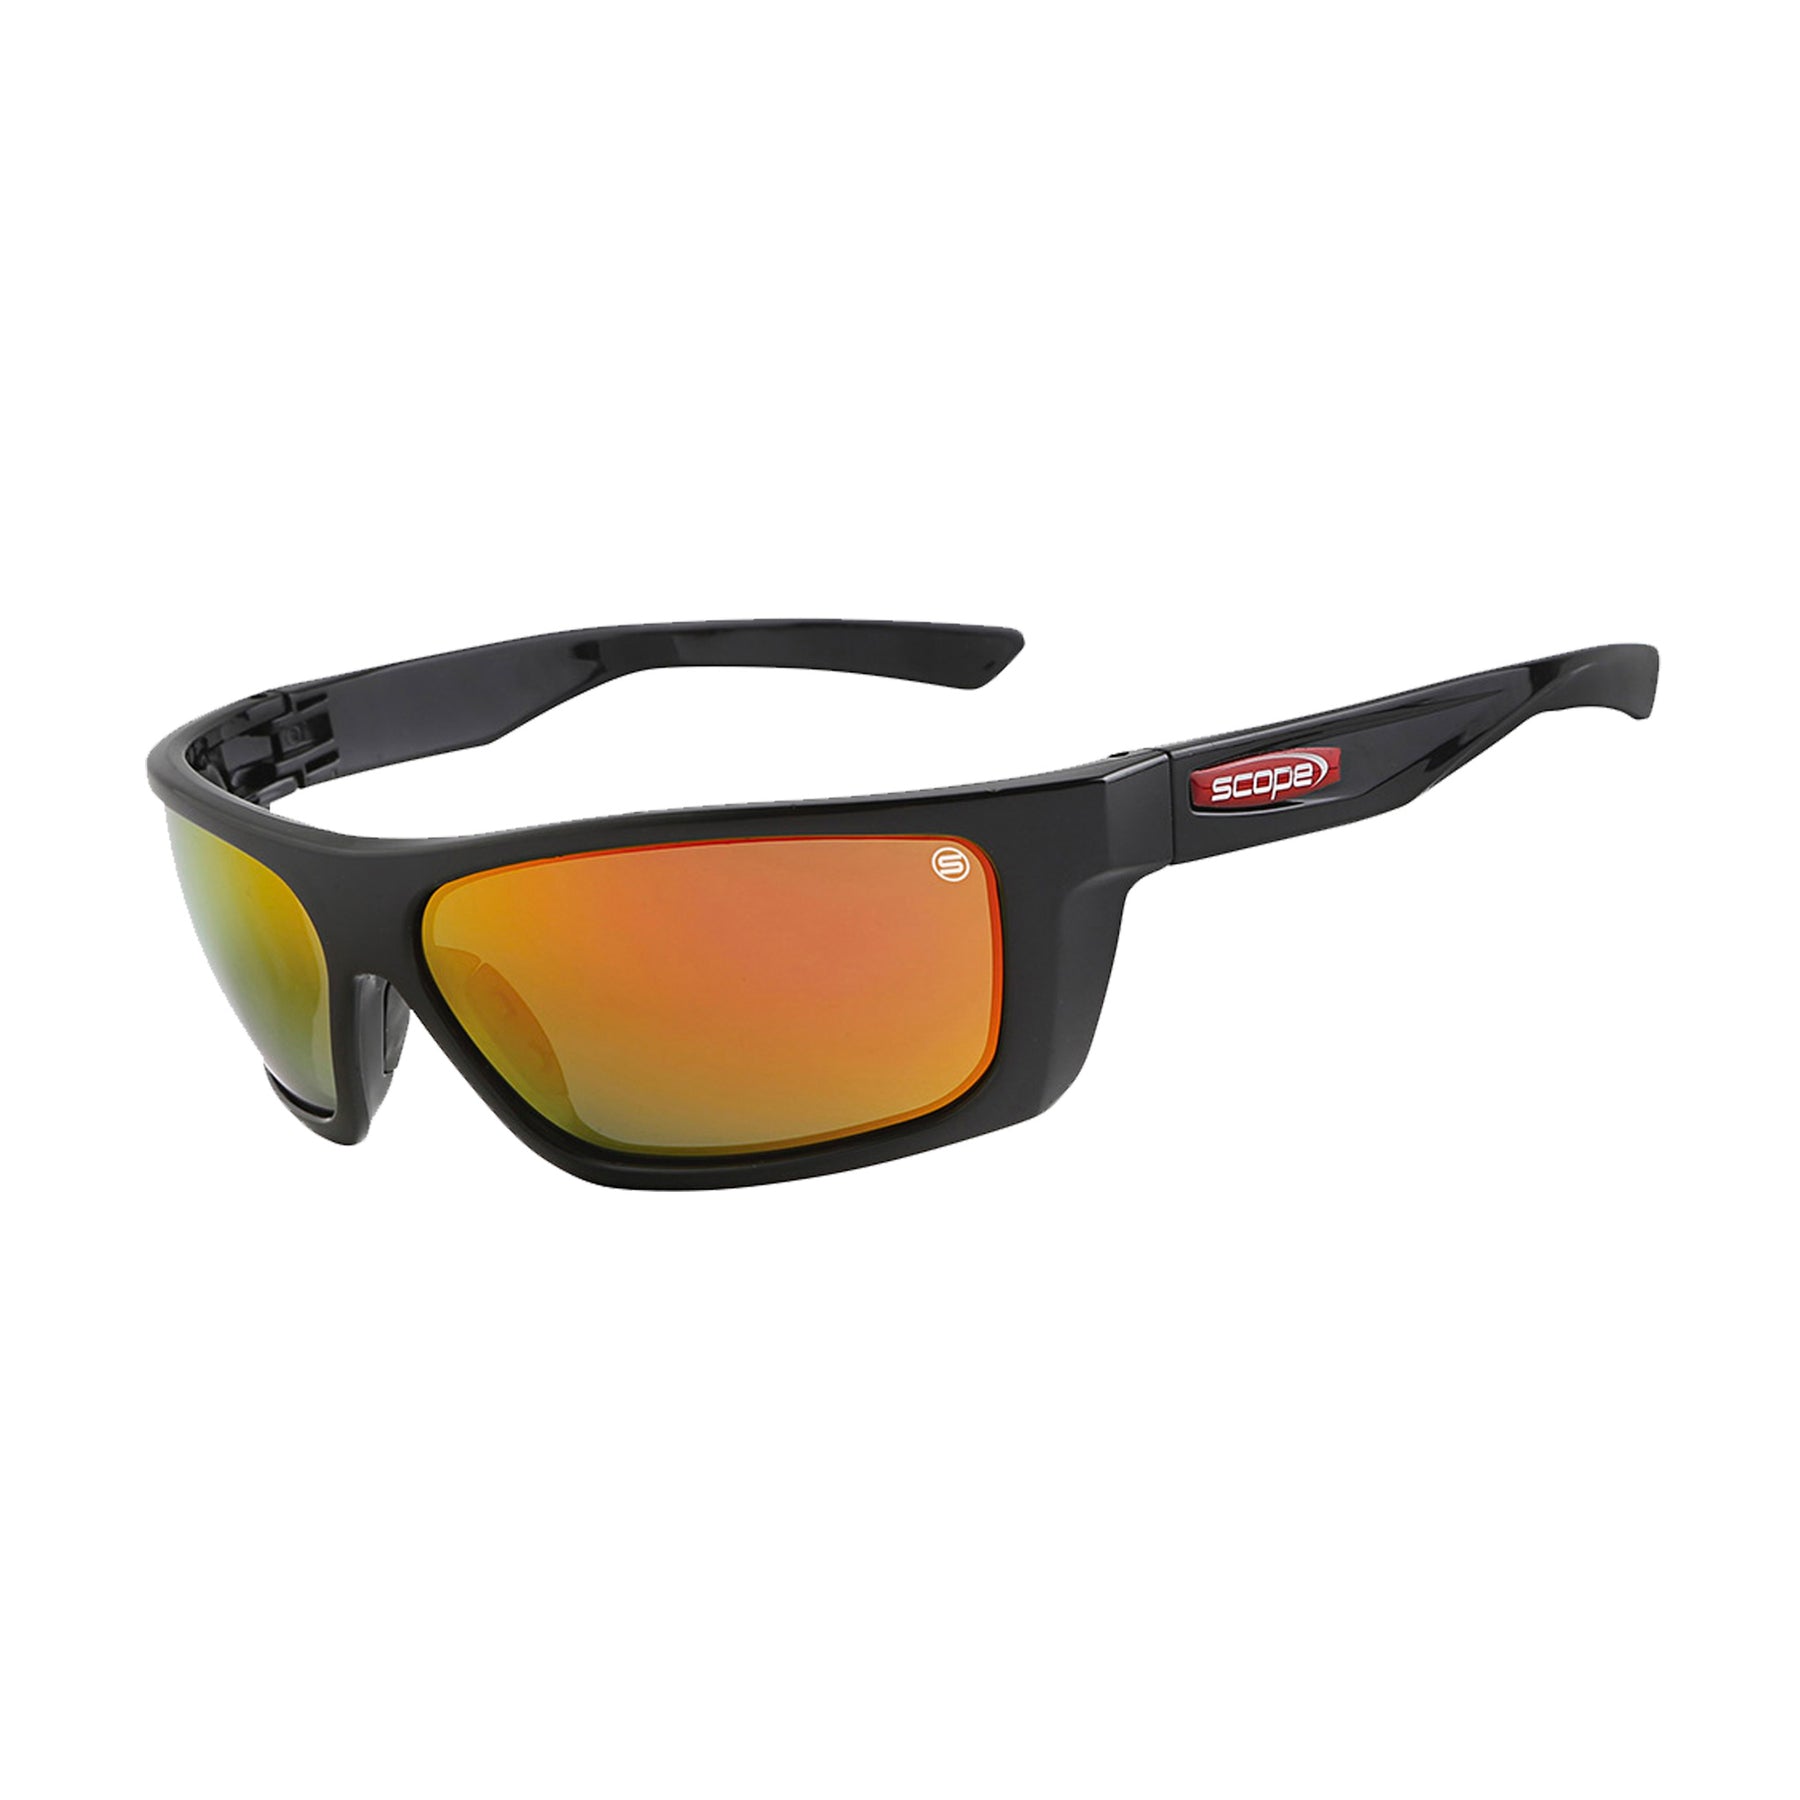 scope optics flash safety glasses with red mirror lens